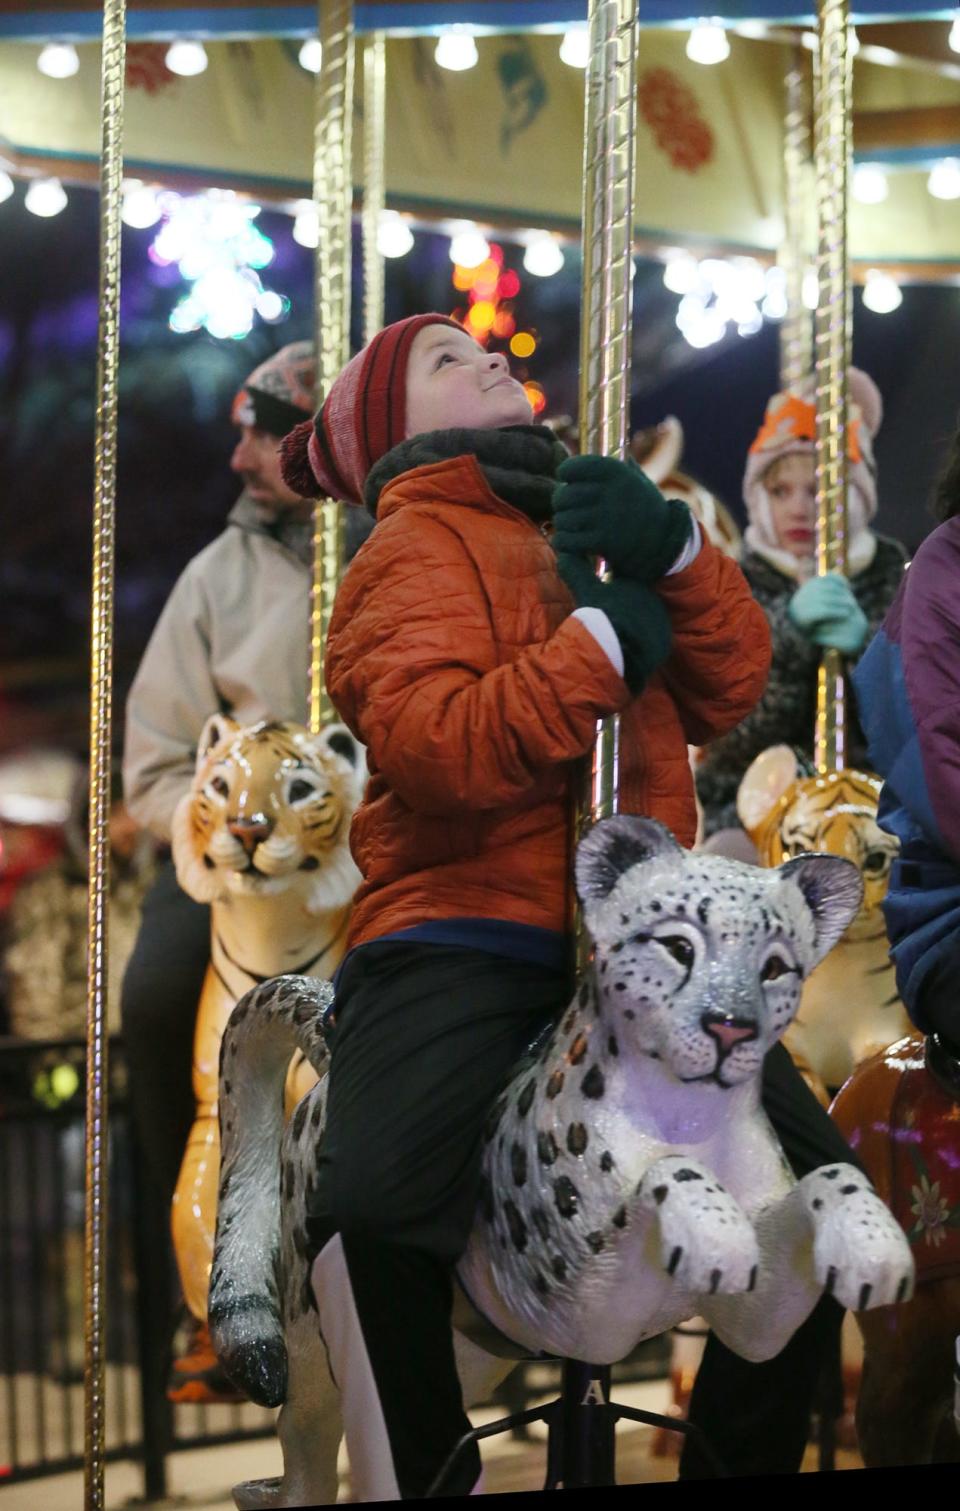 Andrew Steck, 10 of Canton rides a snow leopard on the carousel during the Wishes Can Happen family event at the Akron Zoo on Saturday.